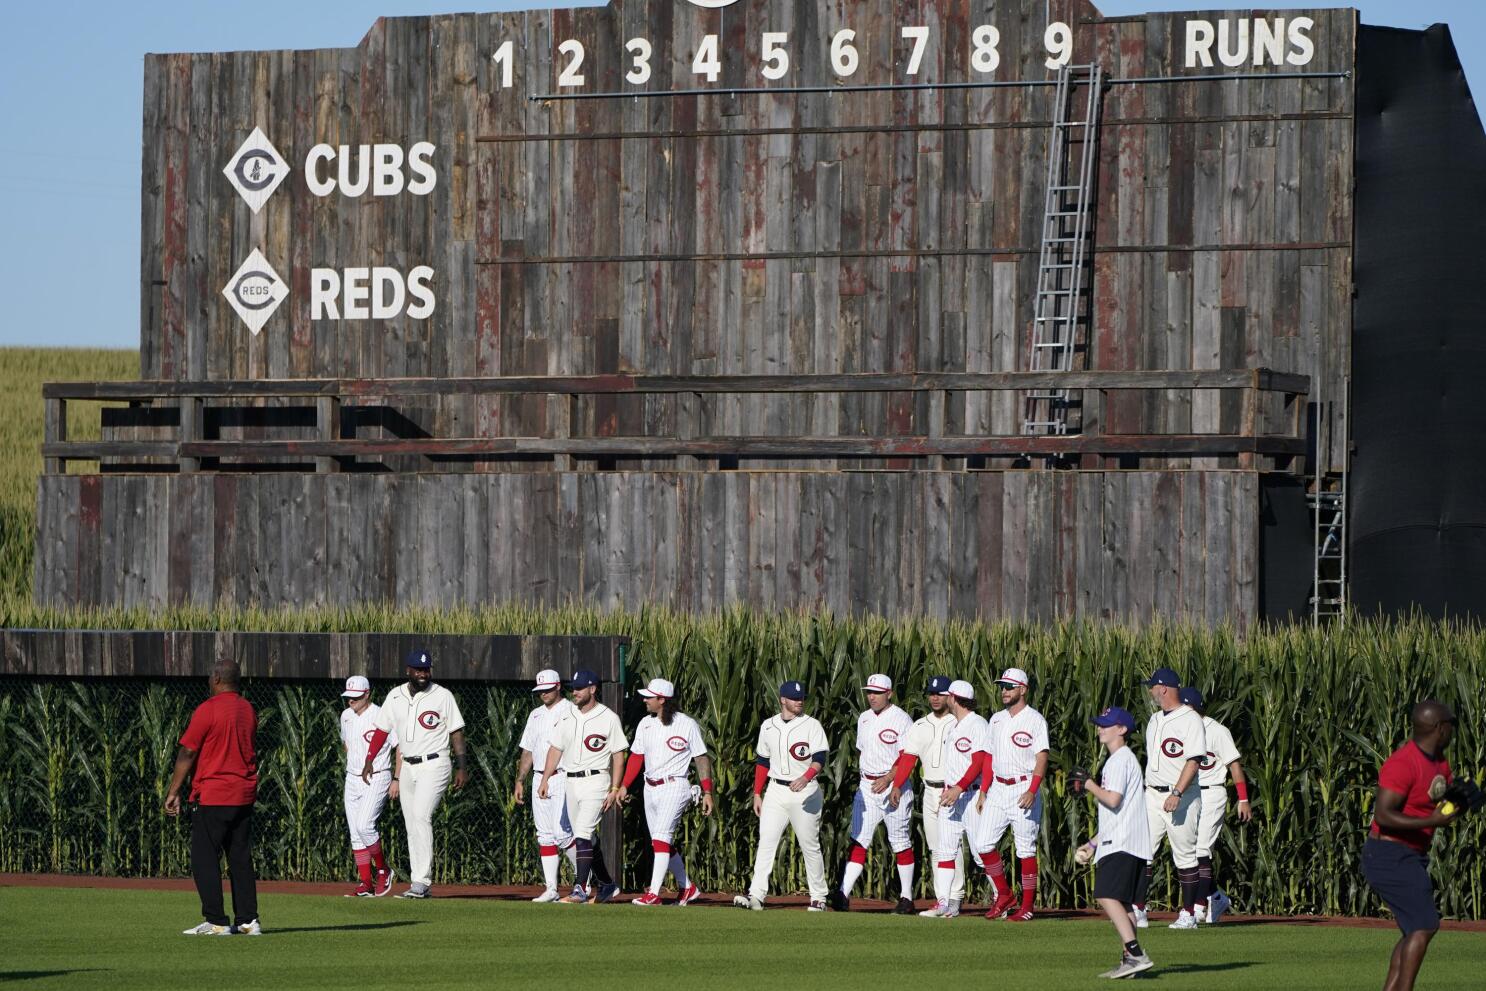 cubs reds field of dreams uniforms